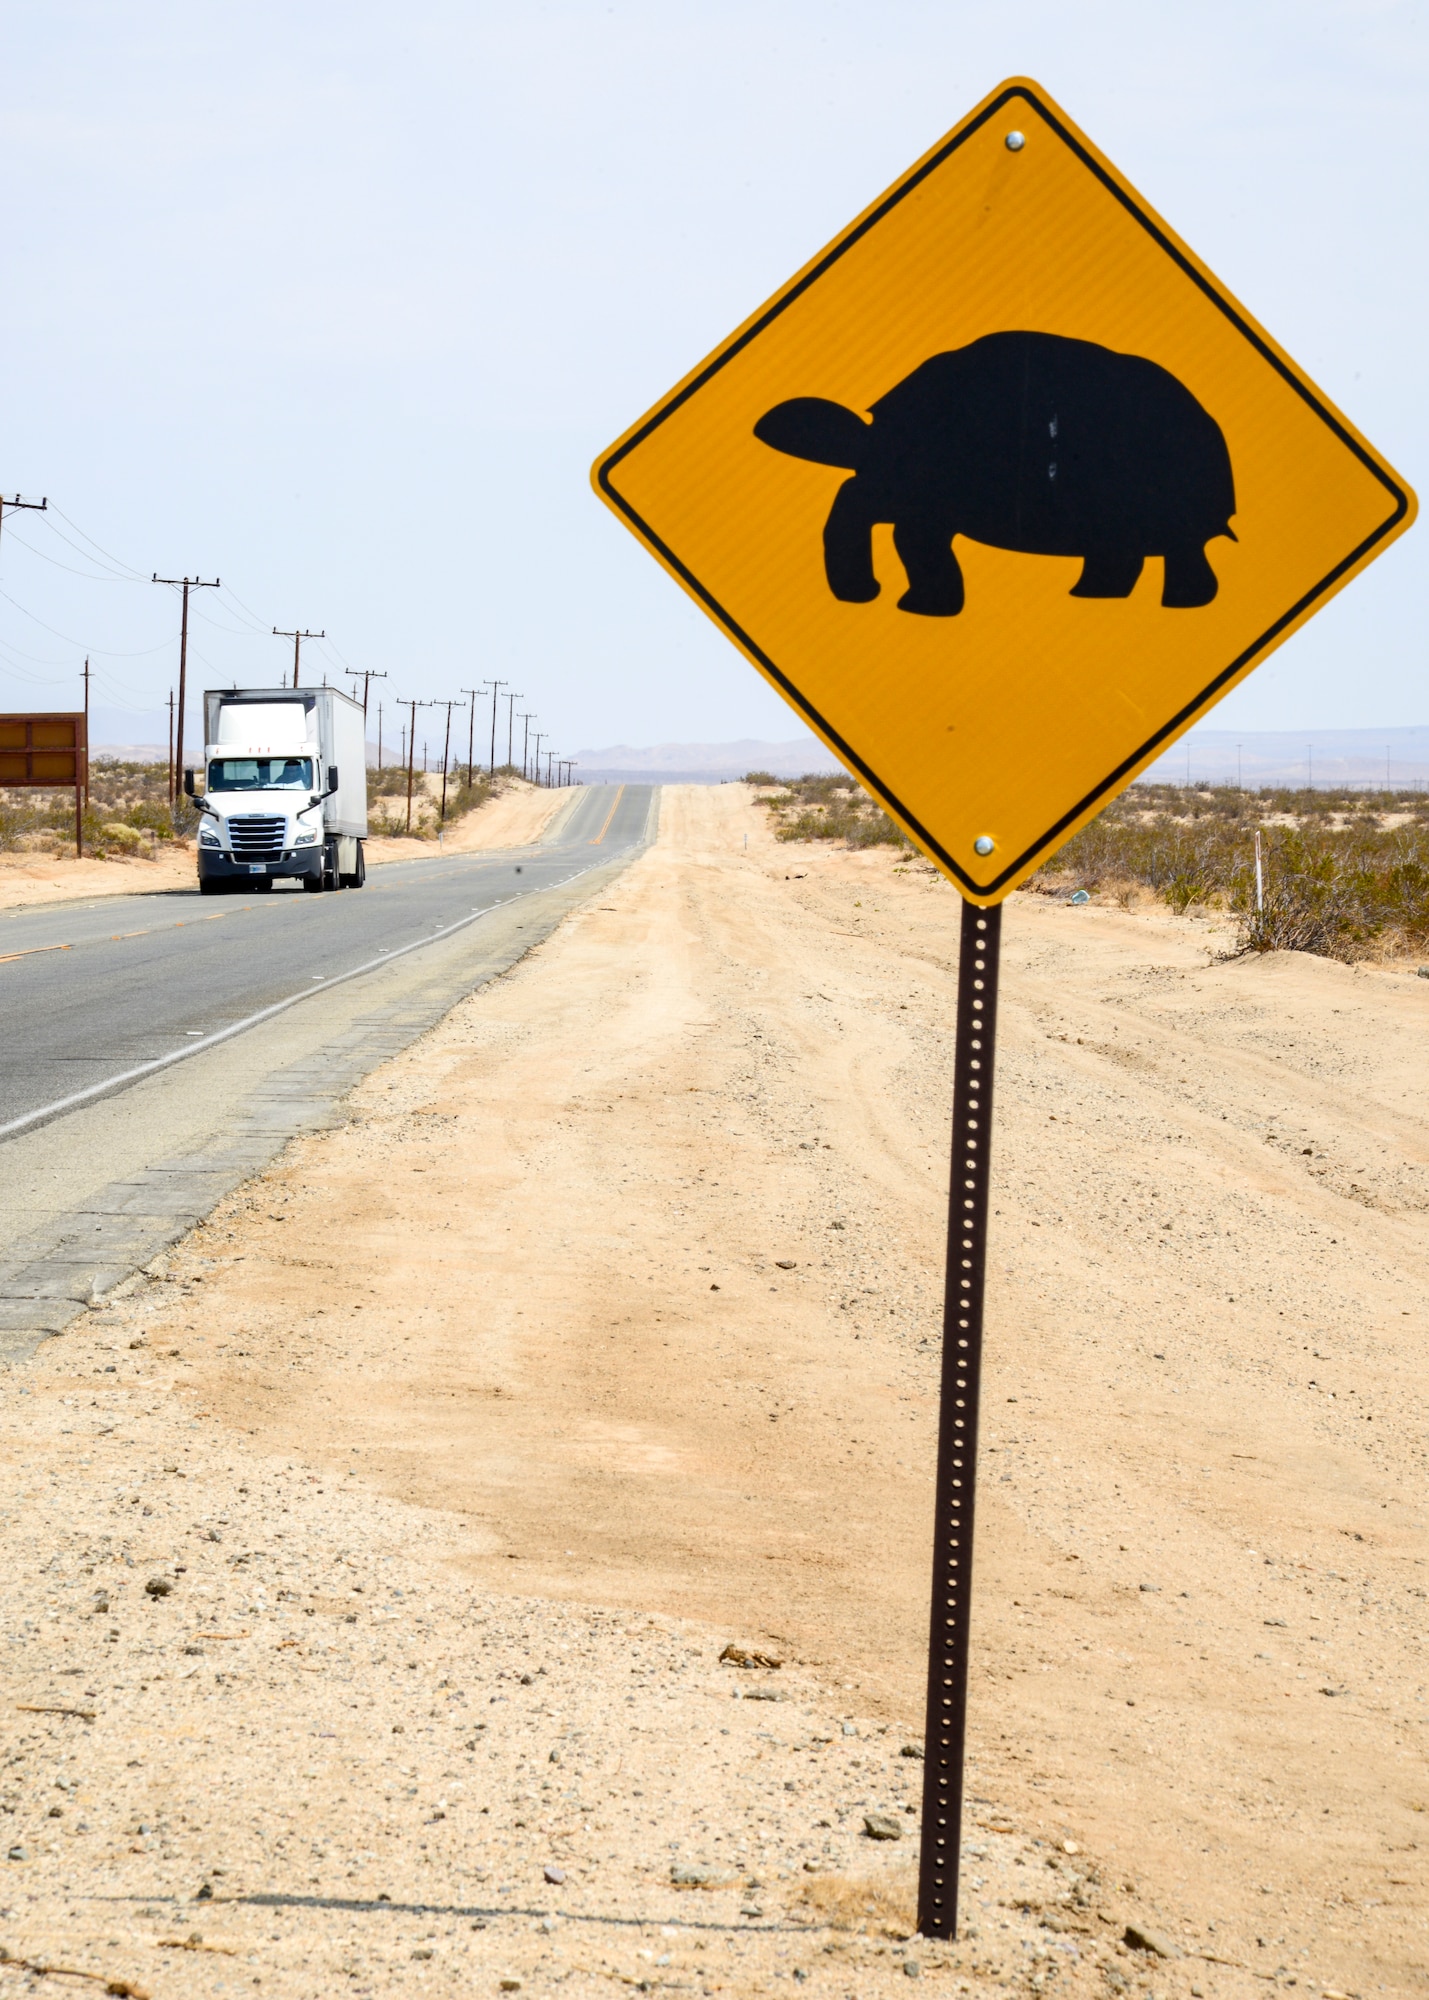 Desert Tortoise crossing signs like this one have been posted at locations on base reminding motorists to be on the lookout for these animals, which are so vulnerable once they venture onto a roadway. (Air Force photo by Gary Hatch)